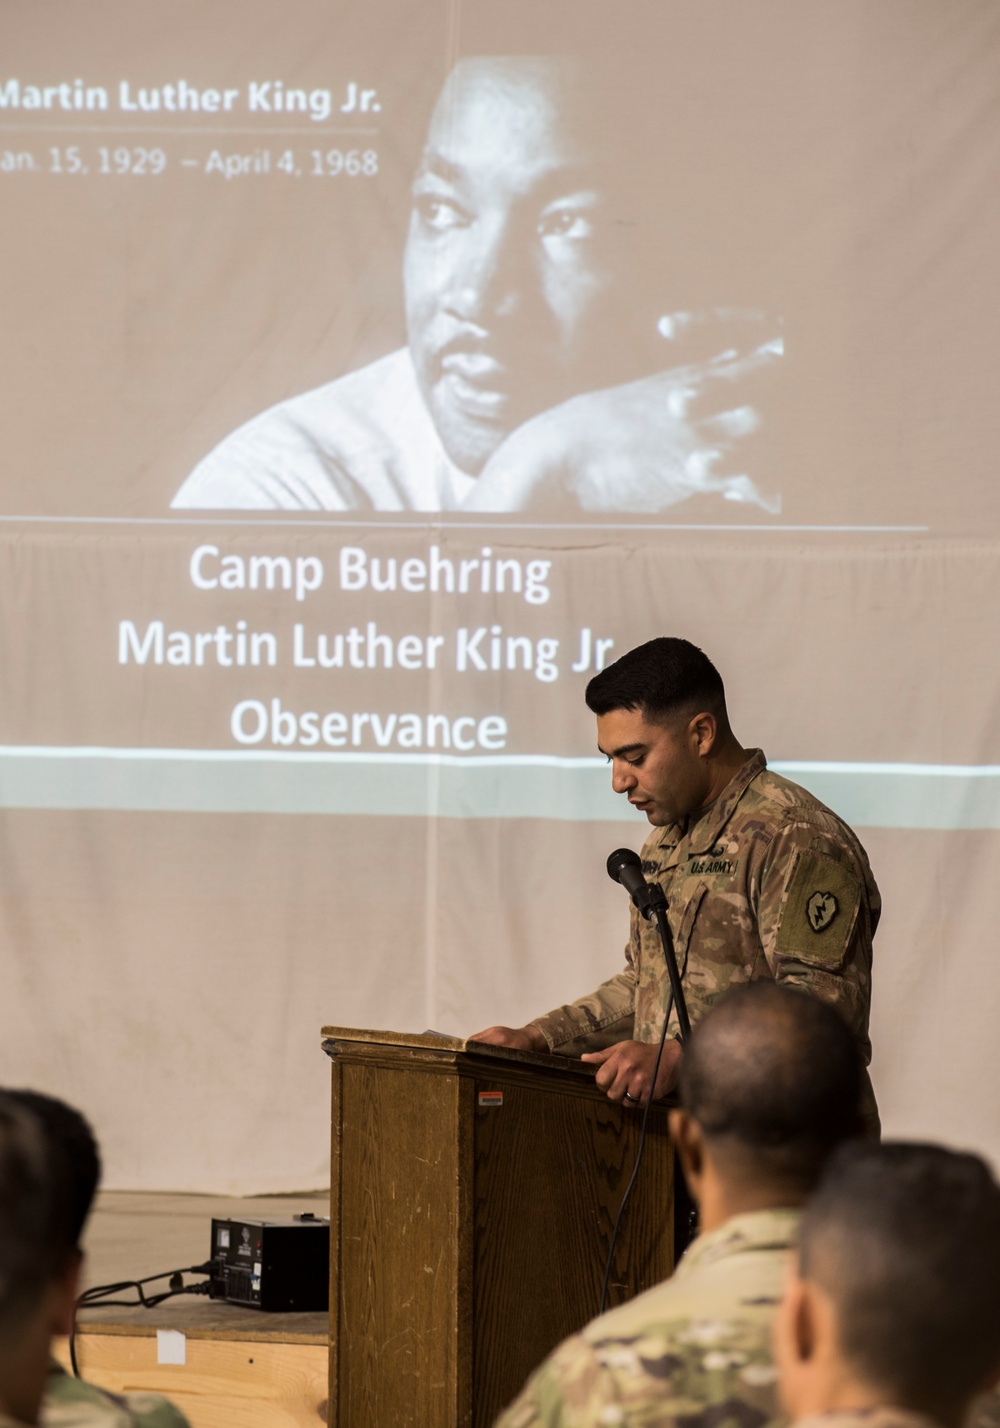 Soldiers gather to remember Dr. Martin Luther King Jr.